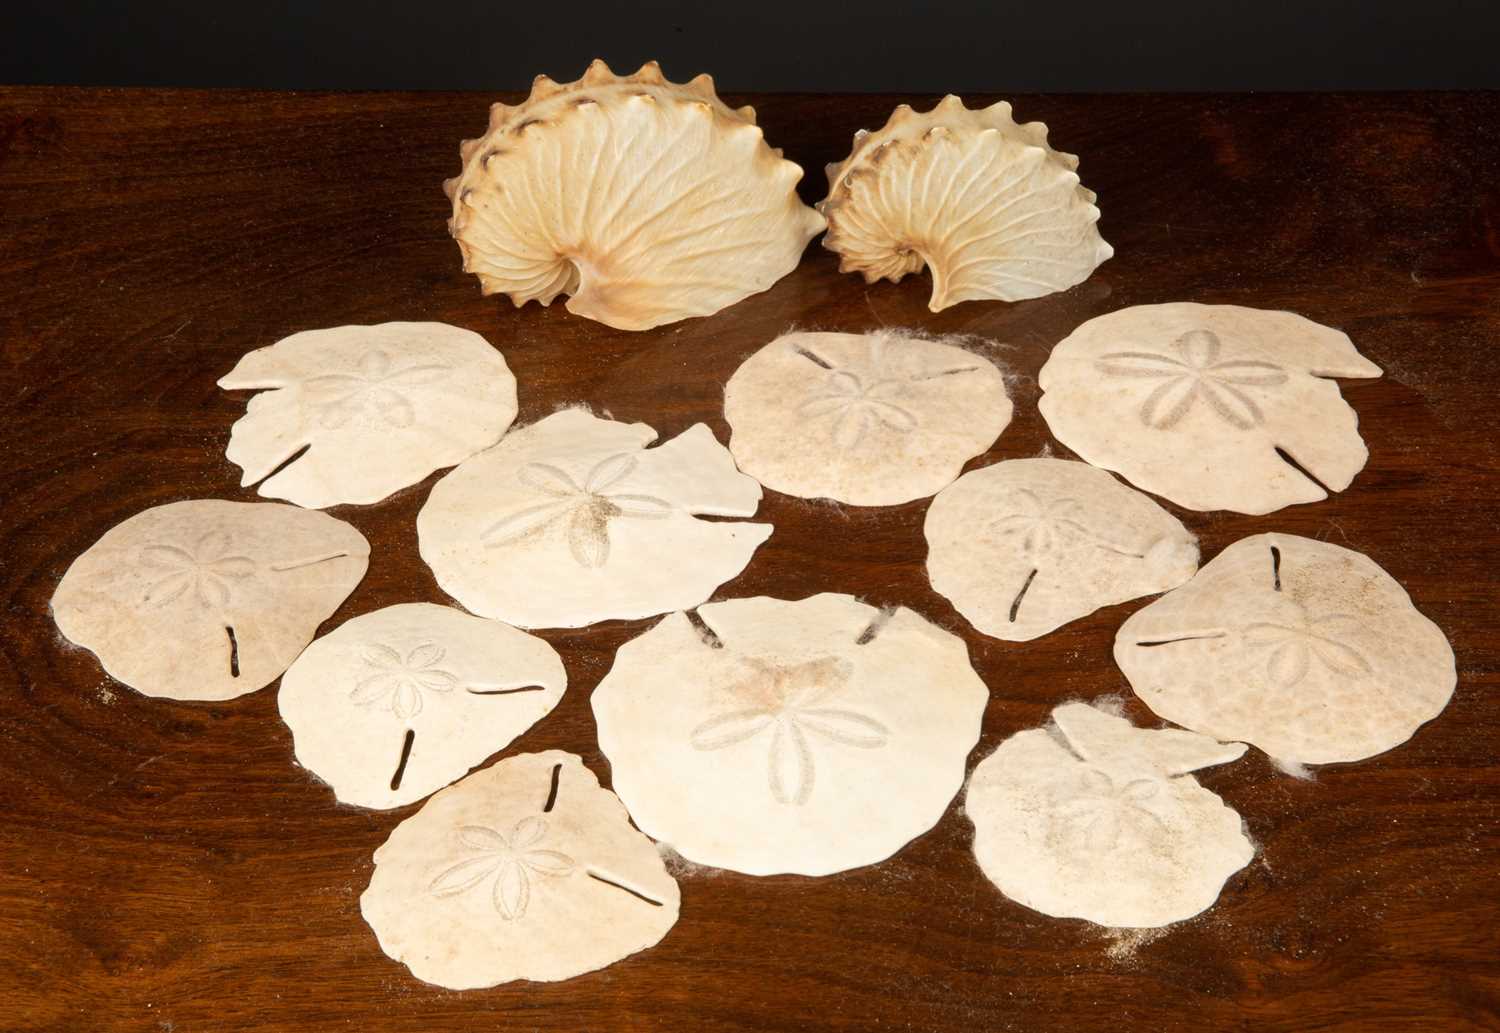 Two unusual seashells and a group of marine skeletons, possibly starfishCondition report: At